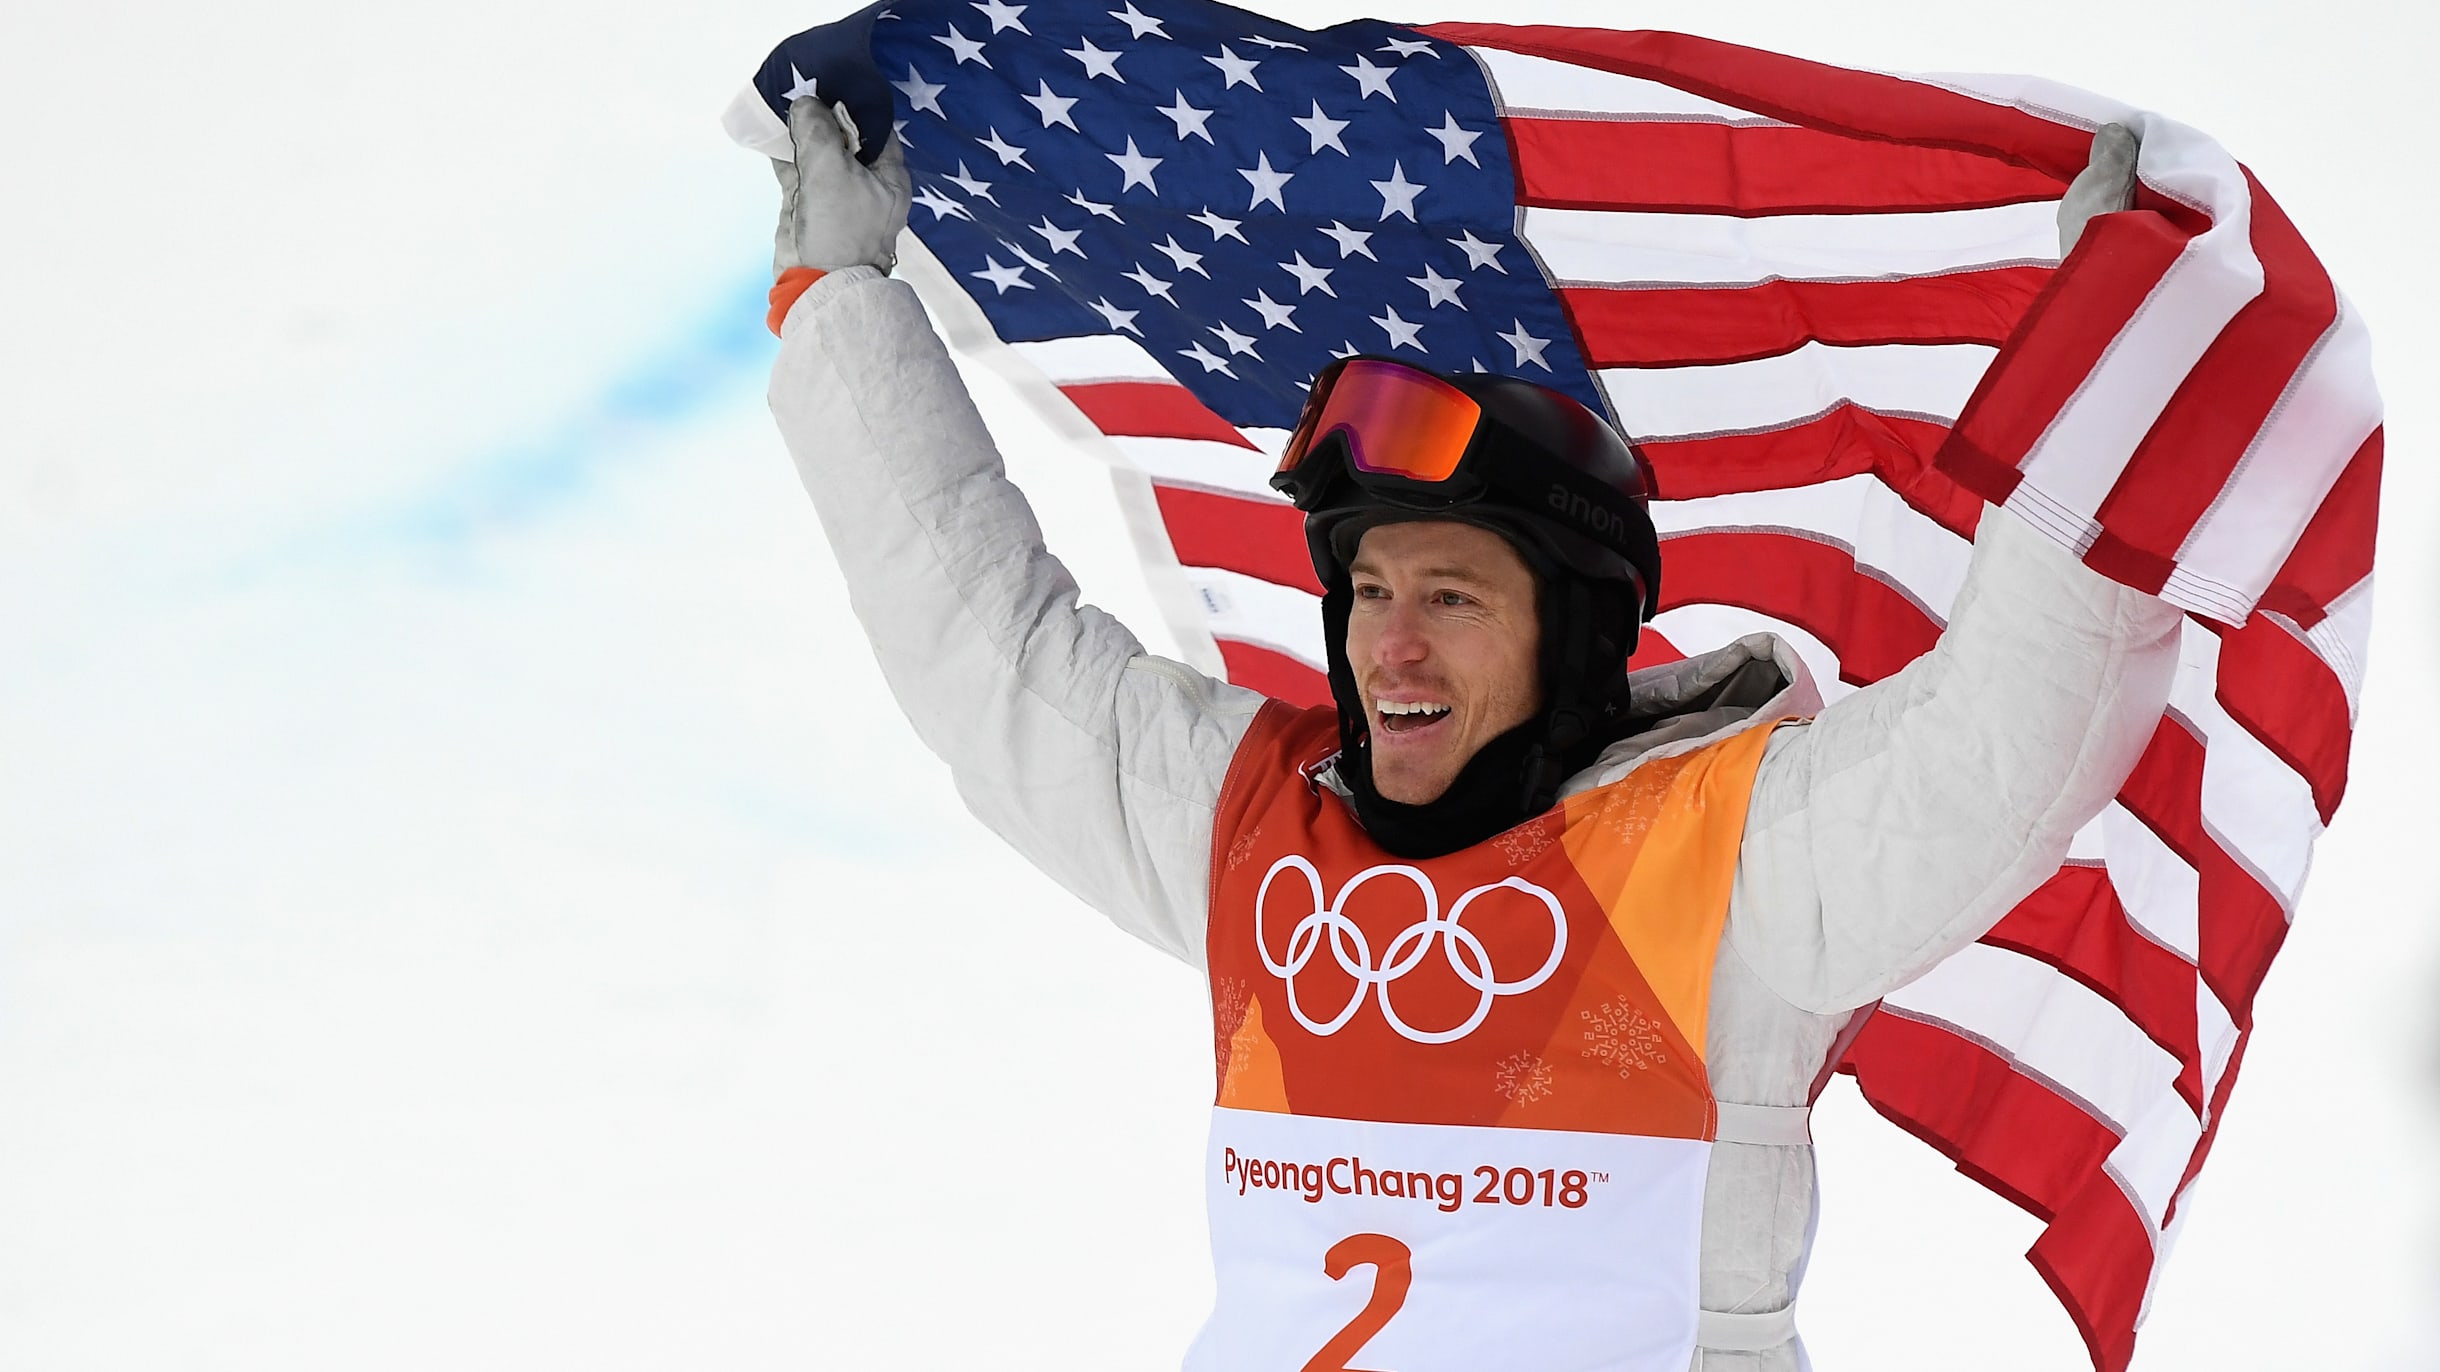 2022 Olympics: Shaun White fails to medal in halfpipe, his final